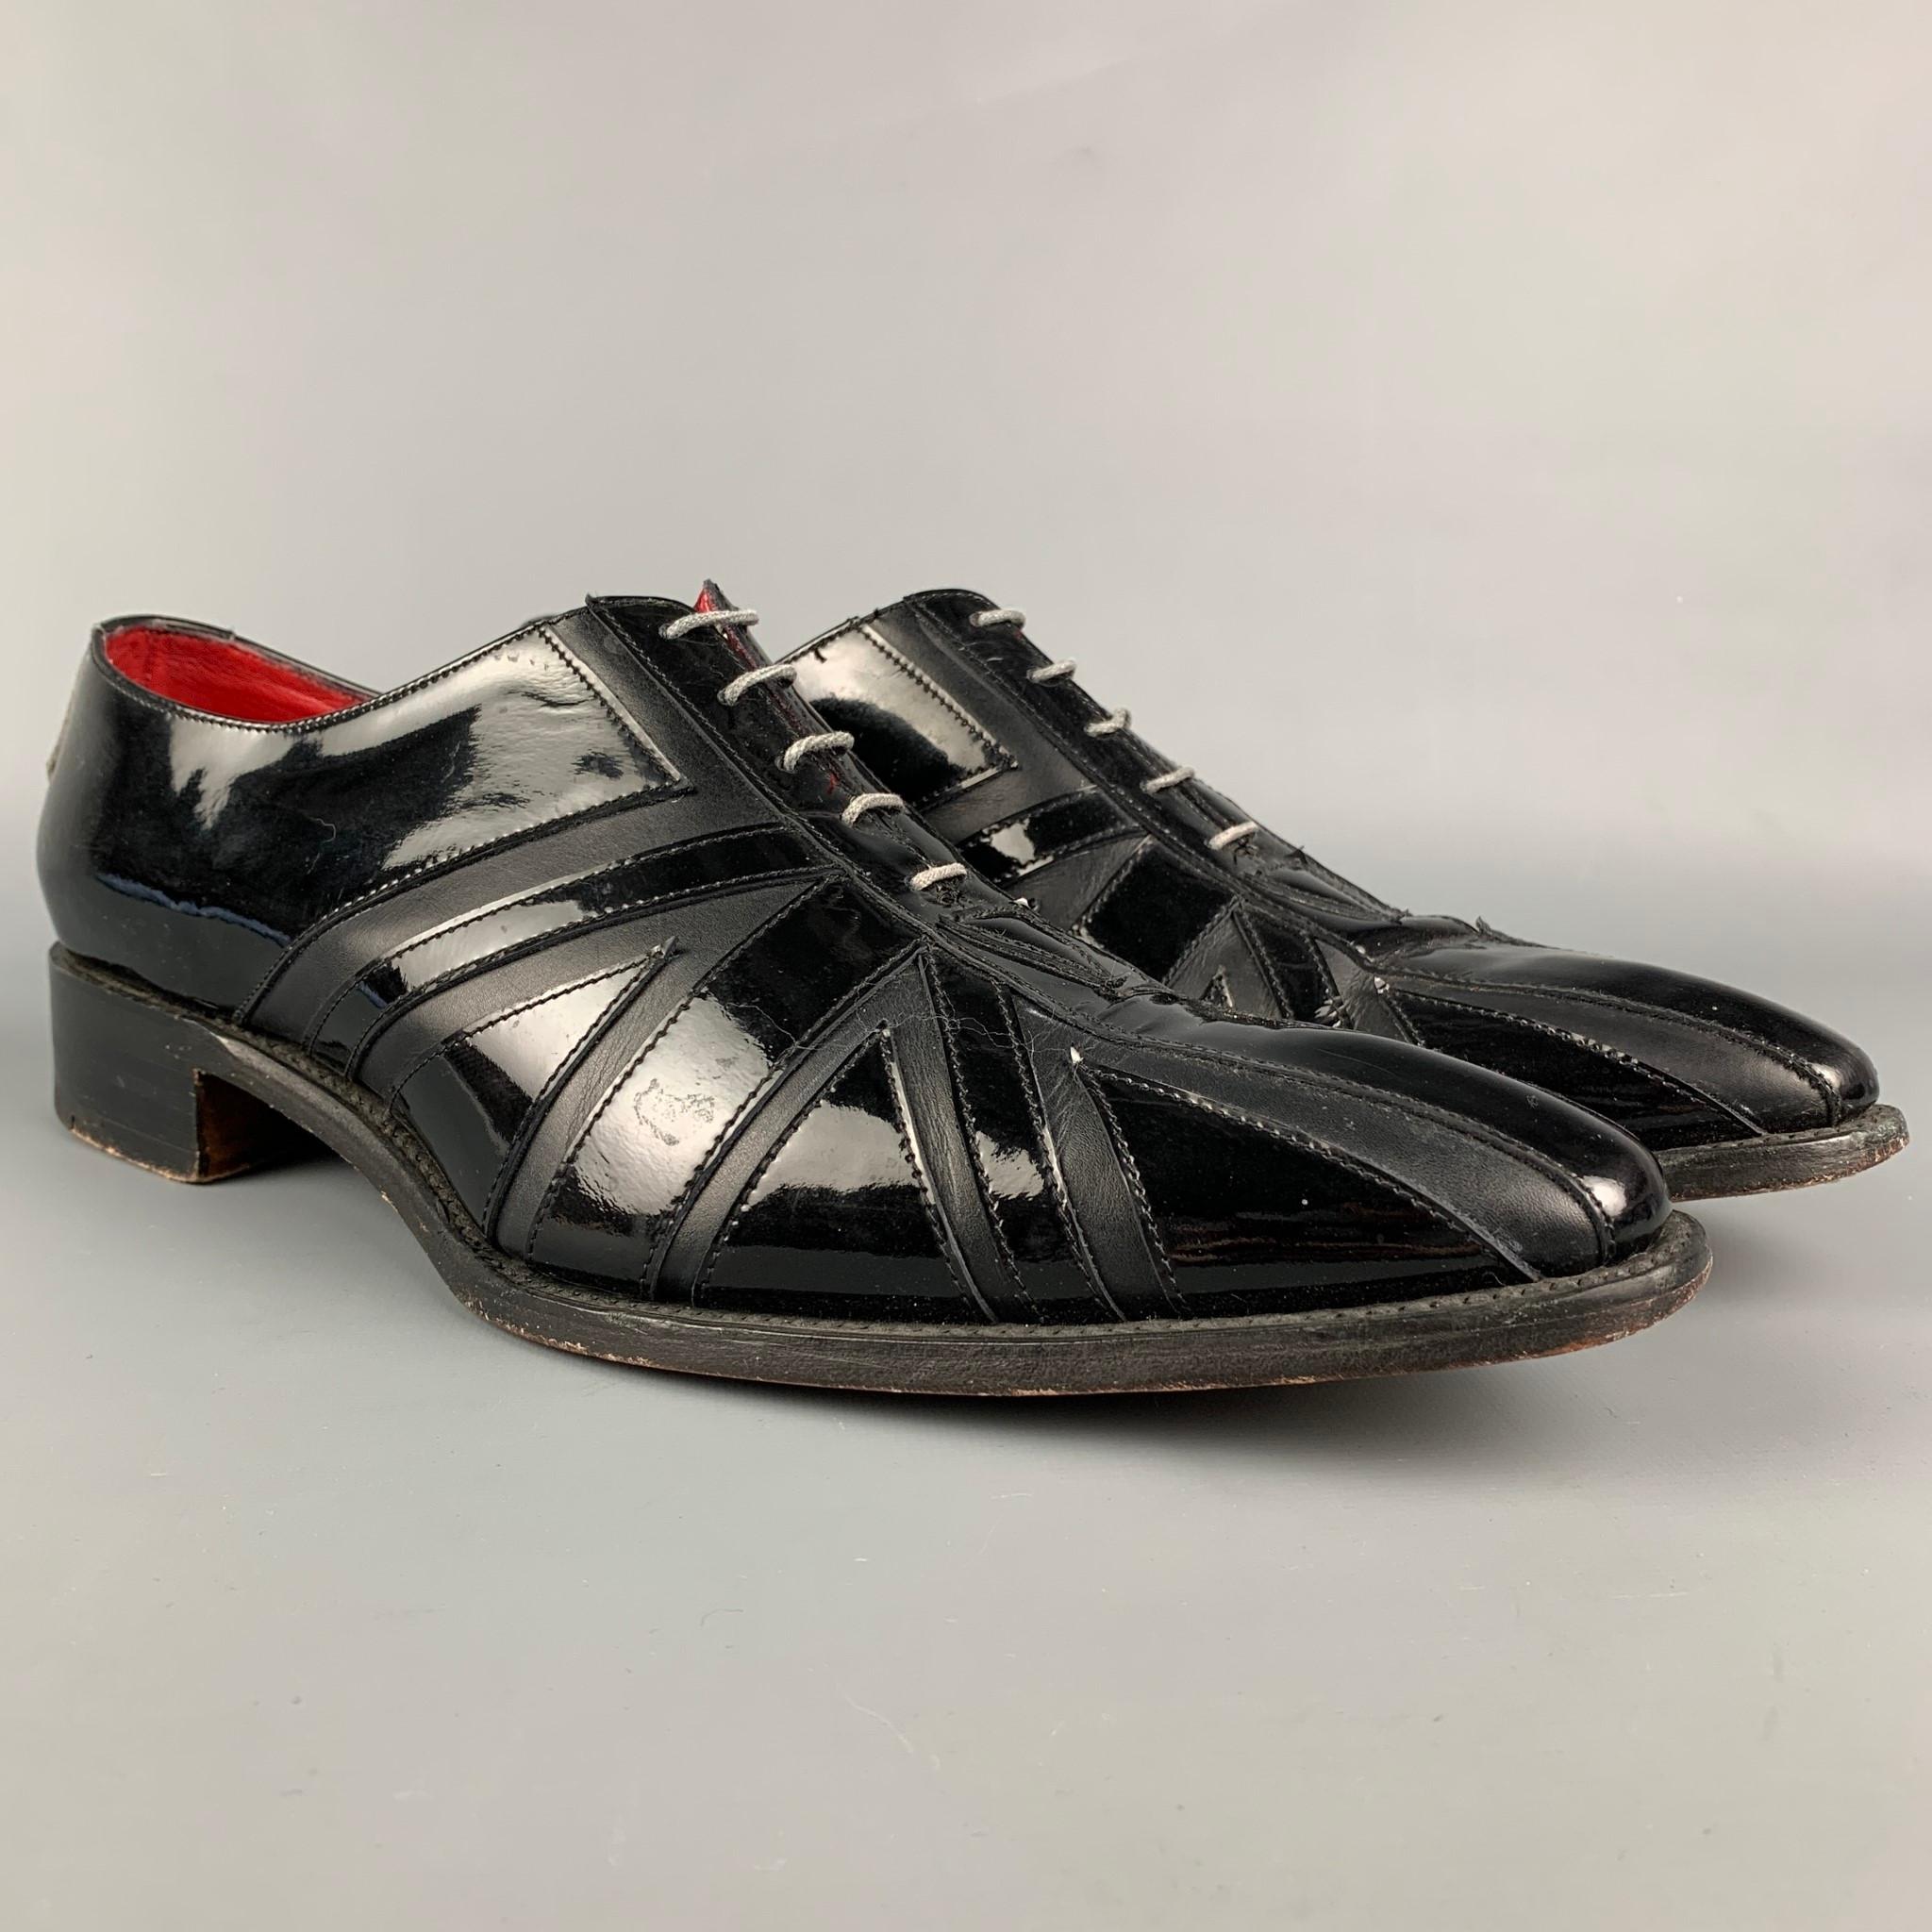 JEFFERY WEST shoes comes in a black leather with a patent leather trim featuring a lace up closure. Made in England.

Gopd Pre-Owned Condition. Mino
Marked: 3629J802 10

Outsole: 13.25 in x 4 in. 